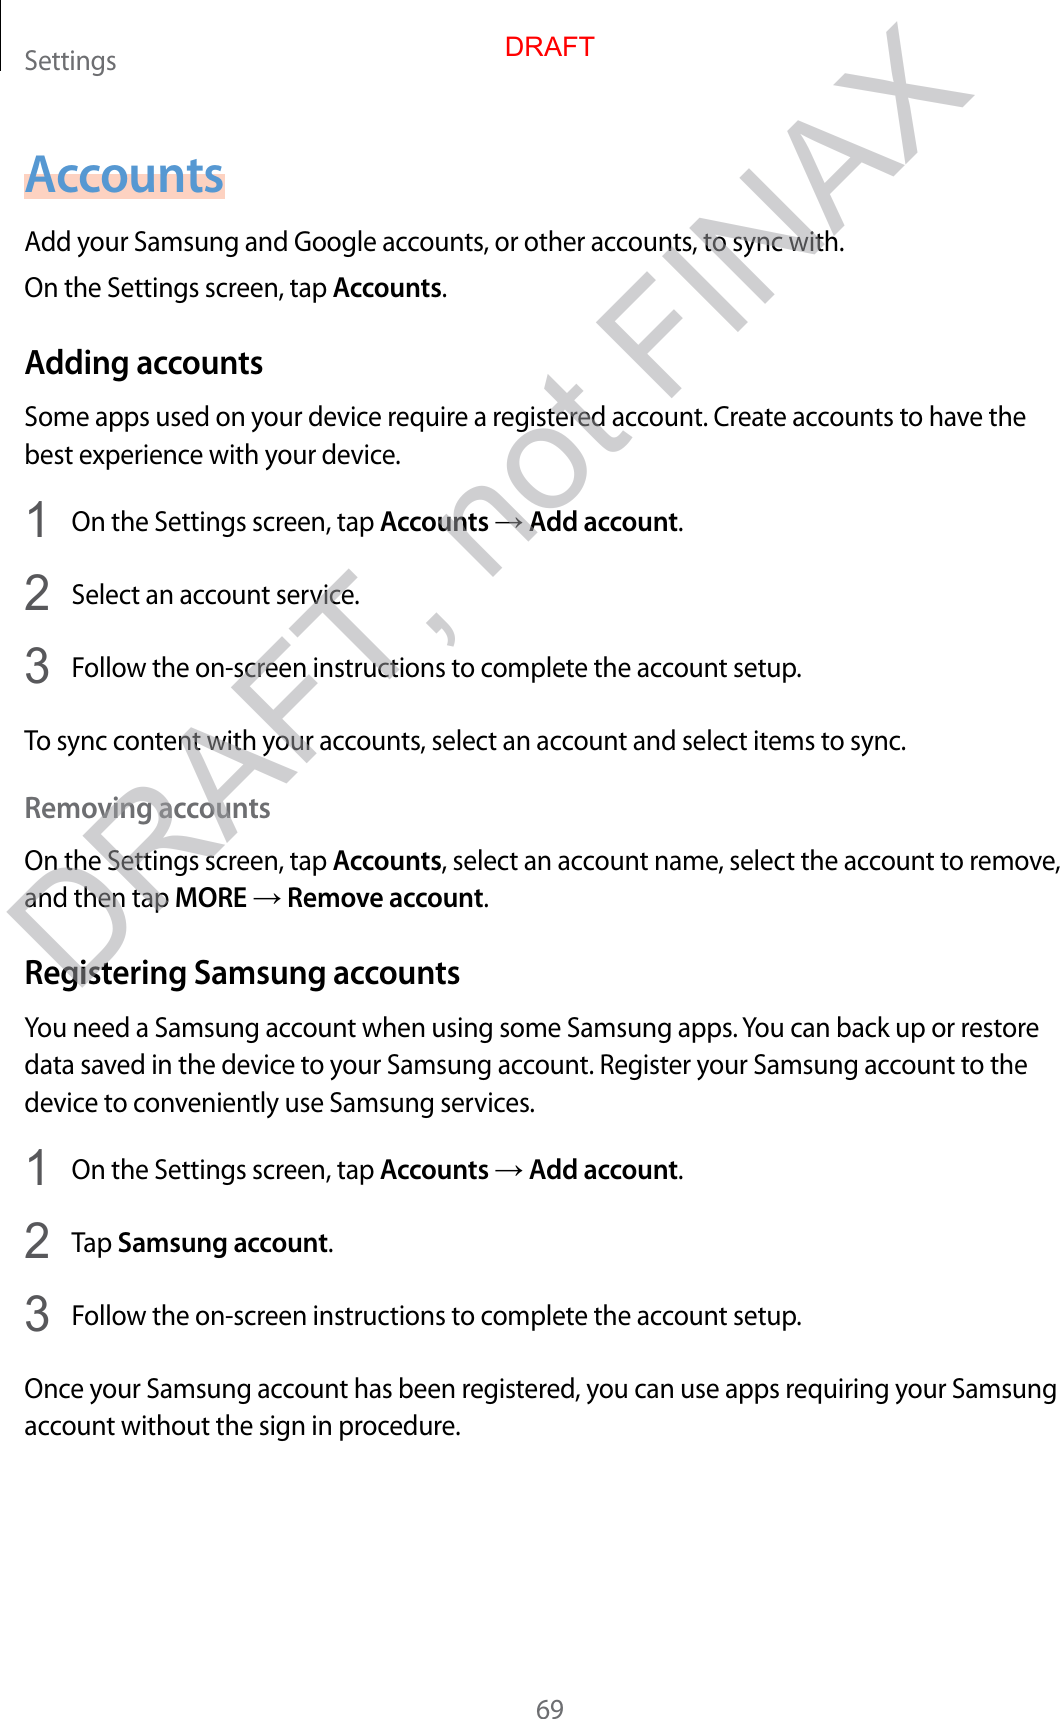 Settings69AccountsAdd your Samsung and Google accounts, or other accounts, to sync with.On the Settings screen, tap Accounts.Adding accountsSome apps used on your device require a registered account. Create accounts to have the best experience with your device.1  On the Settings screen, tap Accounts → Add account.2  Select an account service.3  Follow the on-screen instructions to complete the account setup.To sync content with your accounts, select an account and select items to sync.Removing accountsOn the Settings screen, tap Accounts, select an account name, select the account to remove, and then tap MORE → Remove account.Registering Samsung accountsYou need a Samsung account when using some Samsung apps. You can back up or restore data saved in the device to your Samsung account. Register your Samsung account to the device to conveniently use Samsung services.1  On the Settings screen, tap Accounts → Add account.2  Tap Samsung account.3  Follow the on-screen instructions to complete the account setup.Once your Samsung account has been registered, you can use apps requiring your Samsung account without the sign in procedure.DRAFTDRAFT, not FINAX